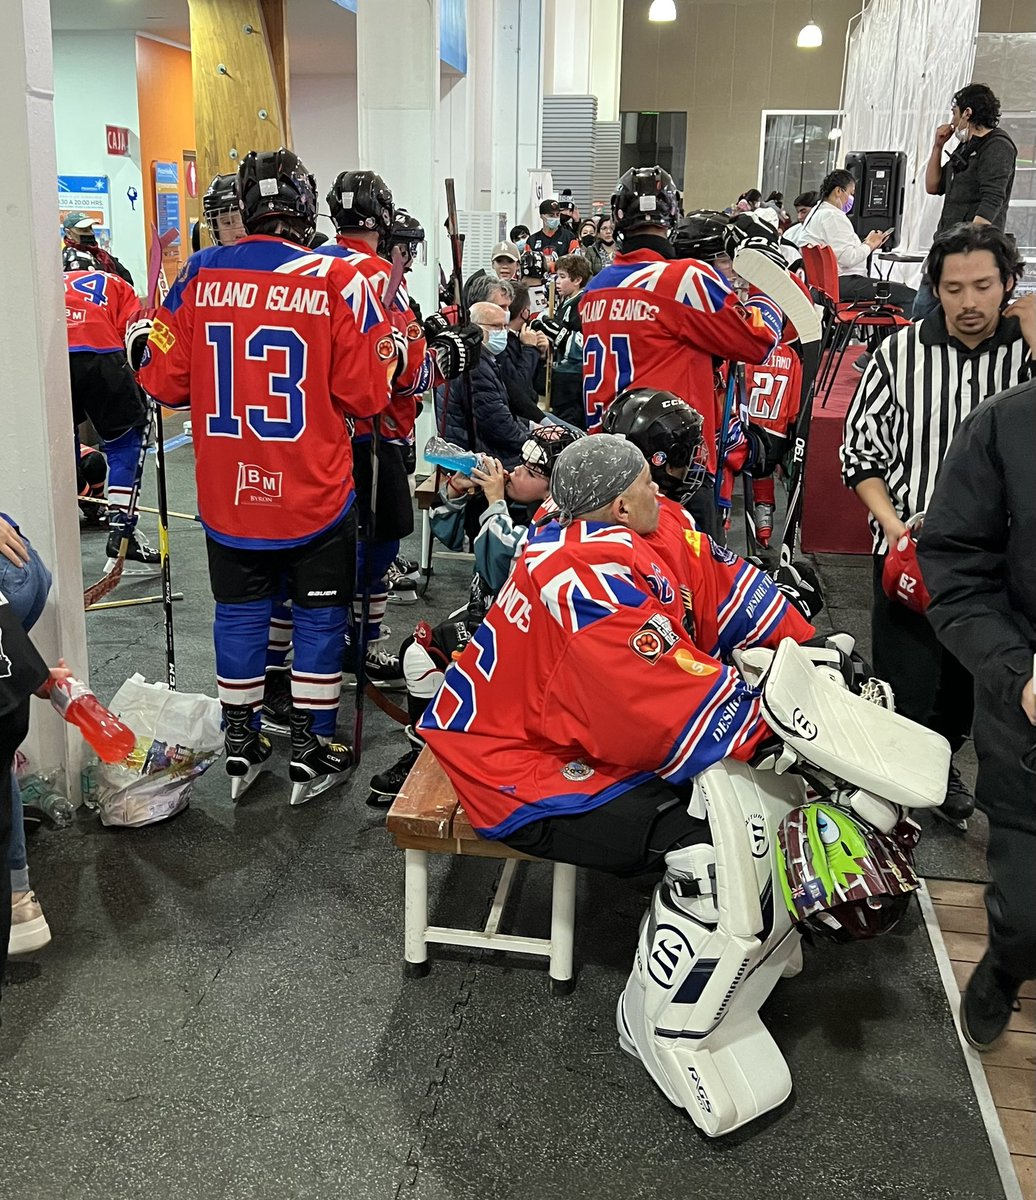 Our seniors are waiting patiently. #anyminutenow #icehockey #puq #puntaarenas #falklands #falklandislands